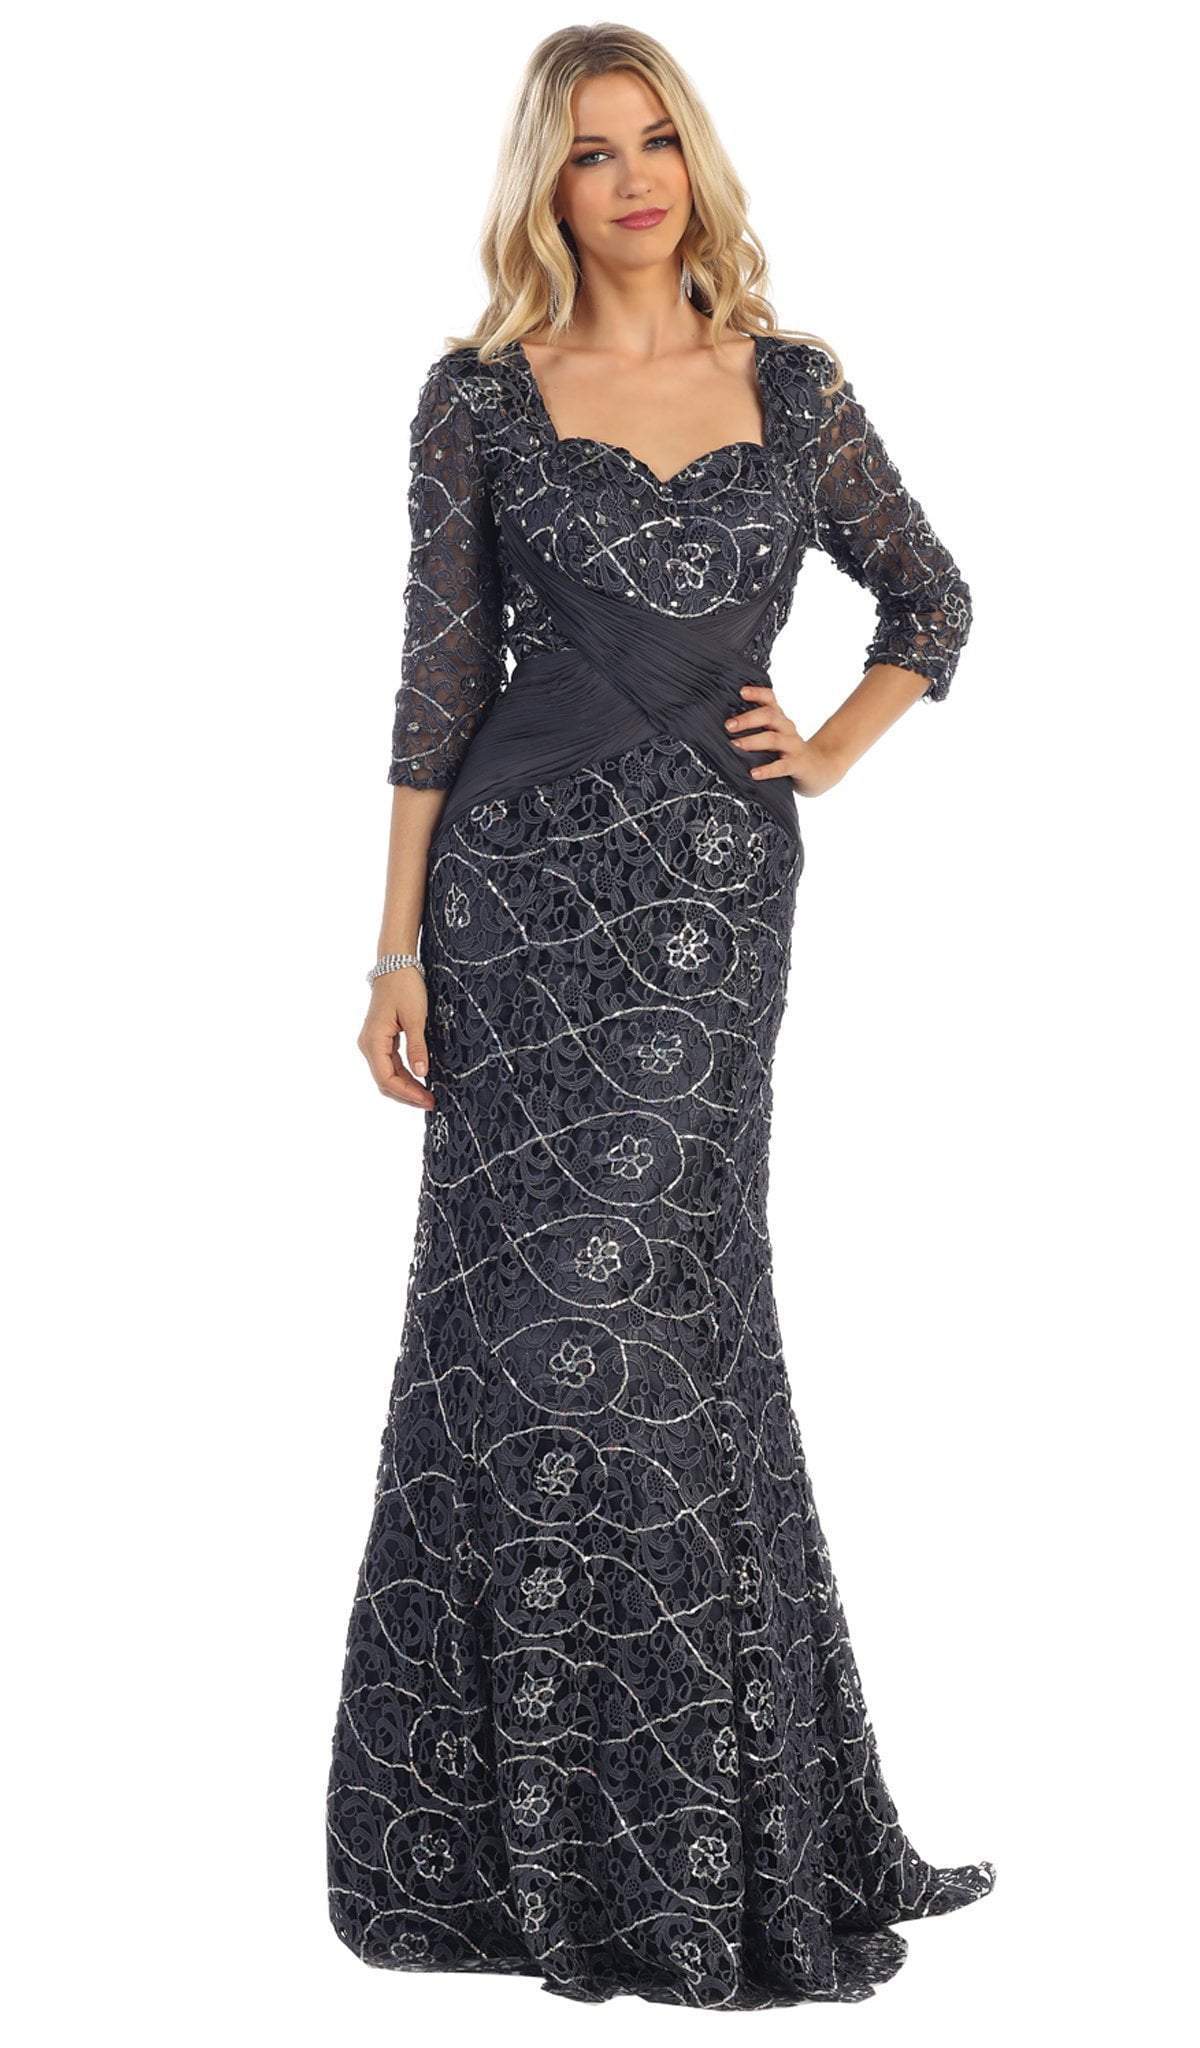 May Queen - Lace Crisscrossed Shirring Mermaid Evening Gown Evening Dresses M / Charcoal Gray